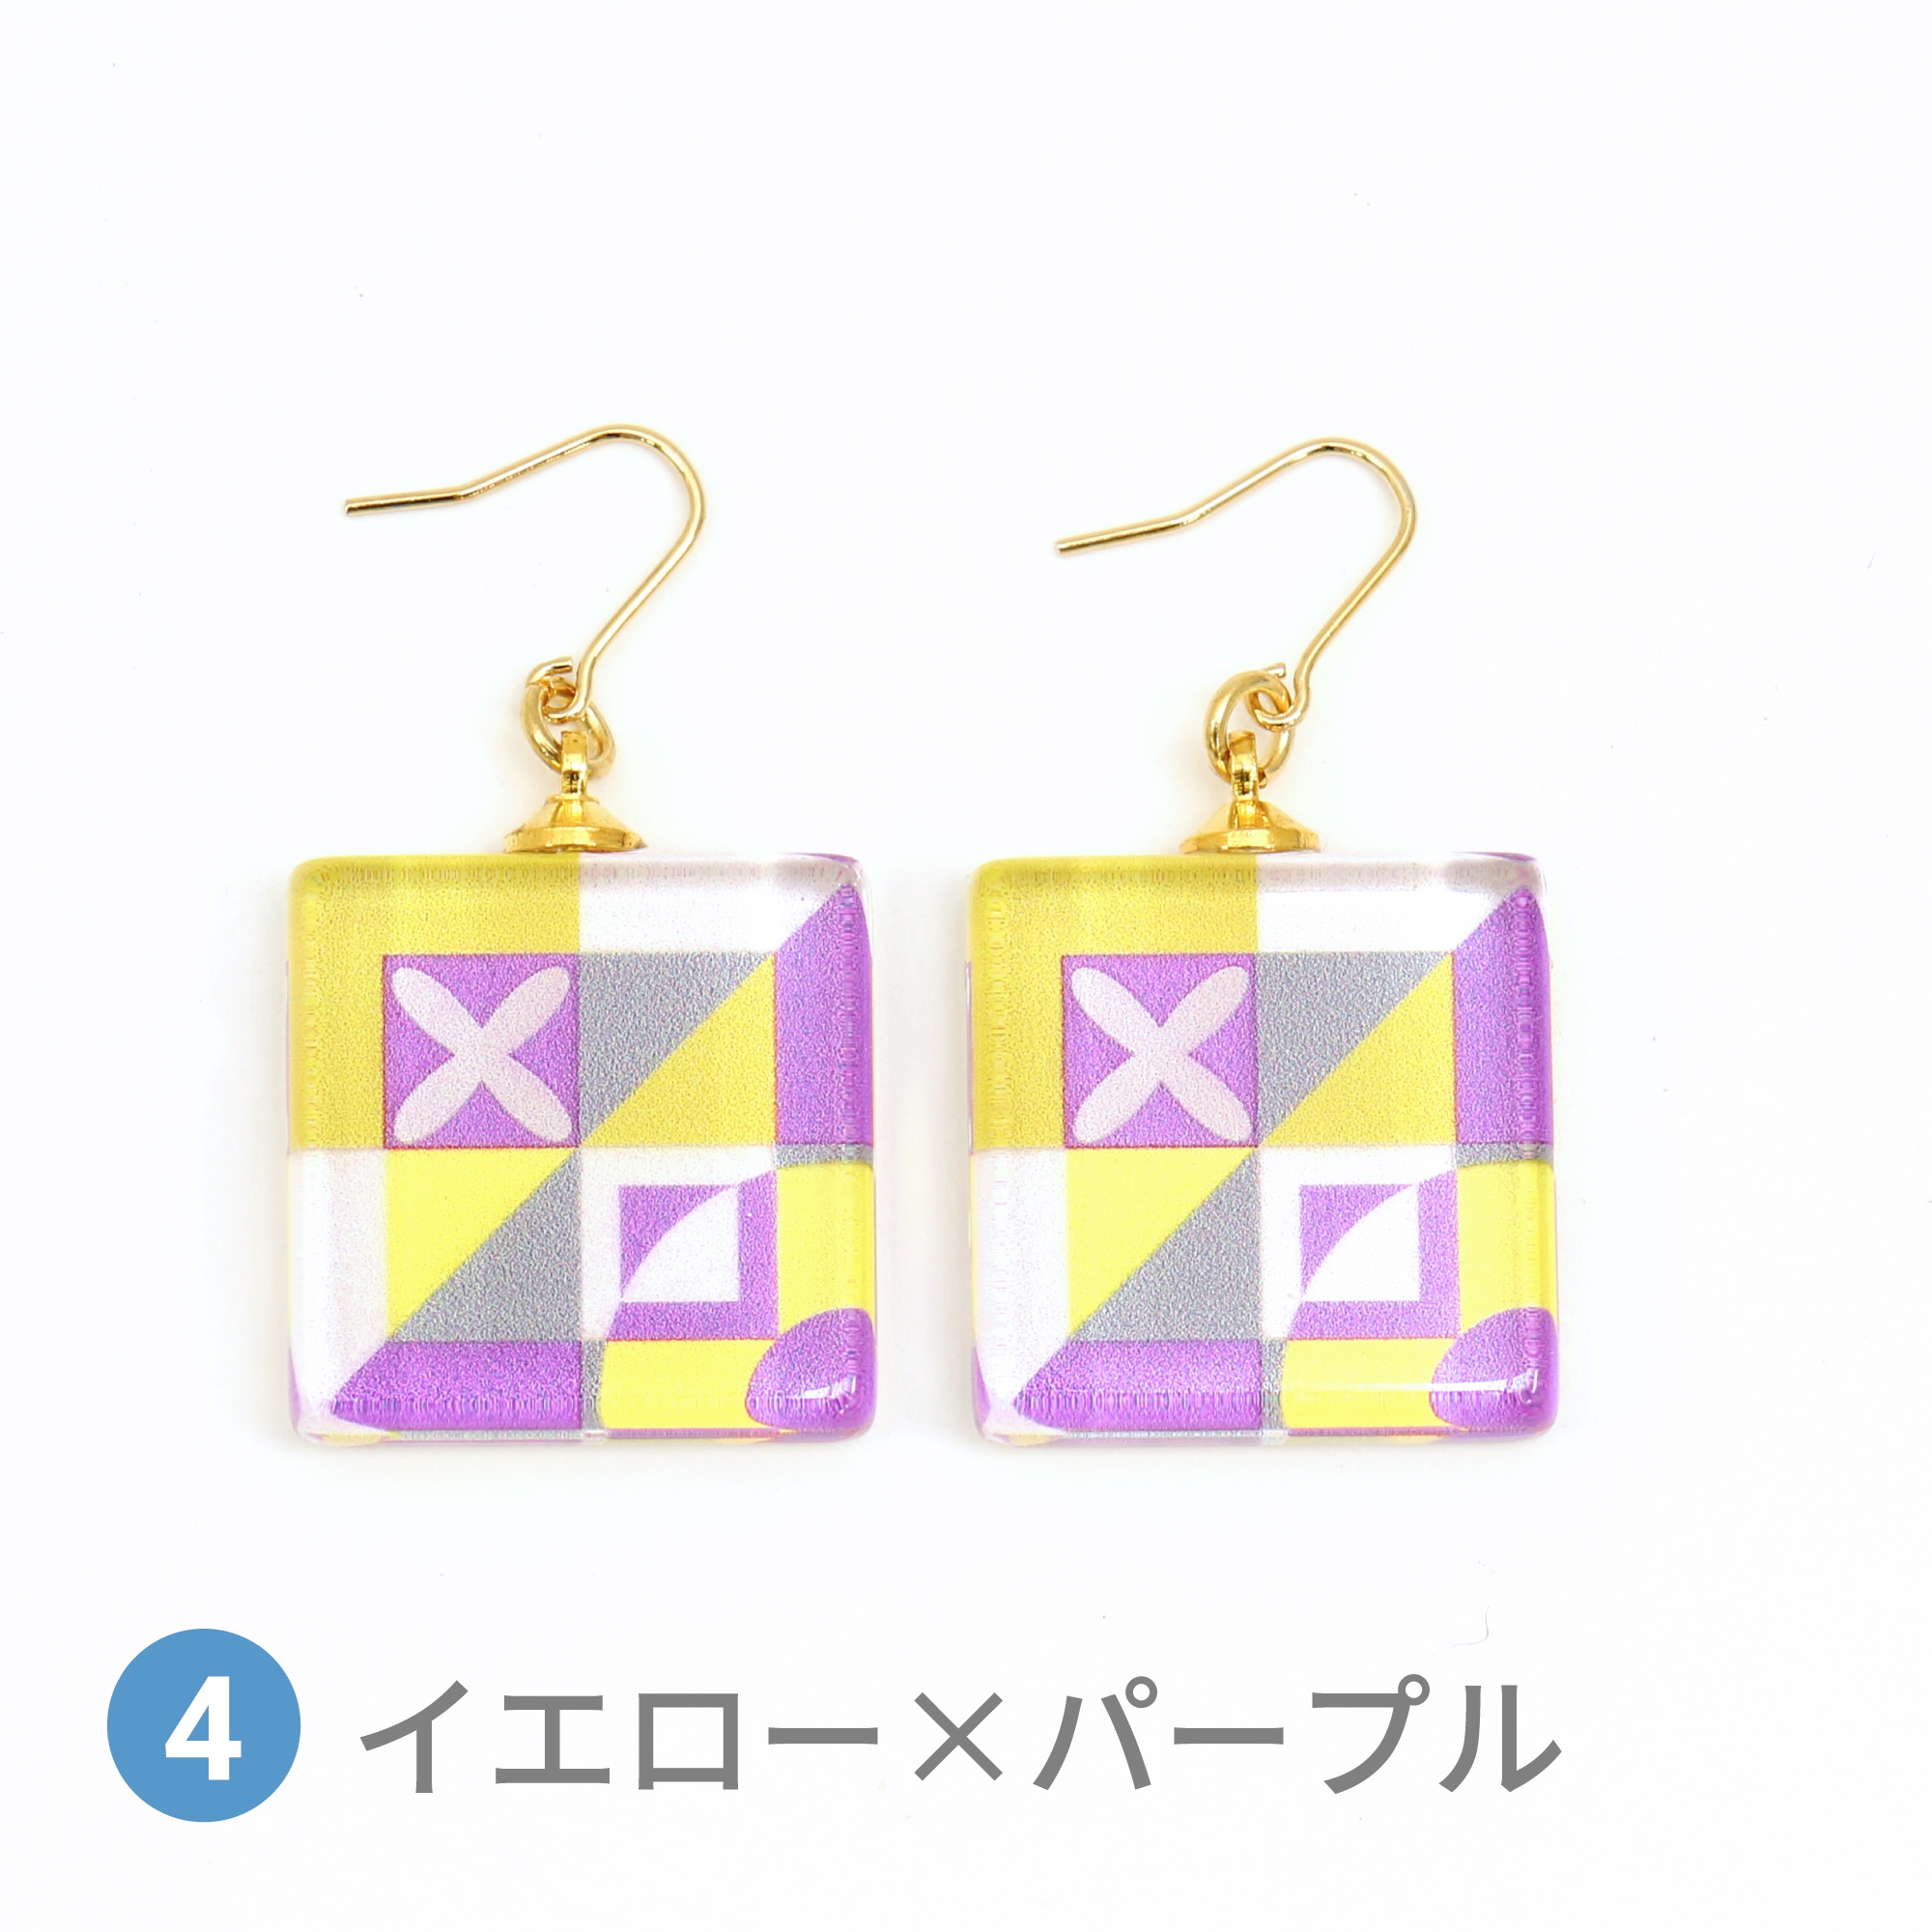 Glass accessories Pierced Earring GRID SYSTEM yellow&purple square shape